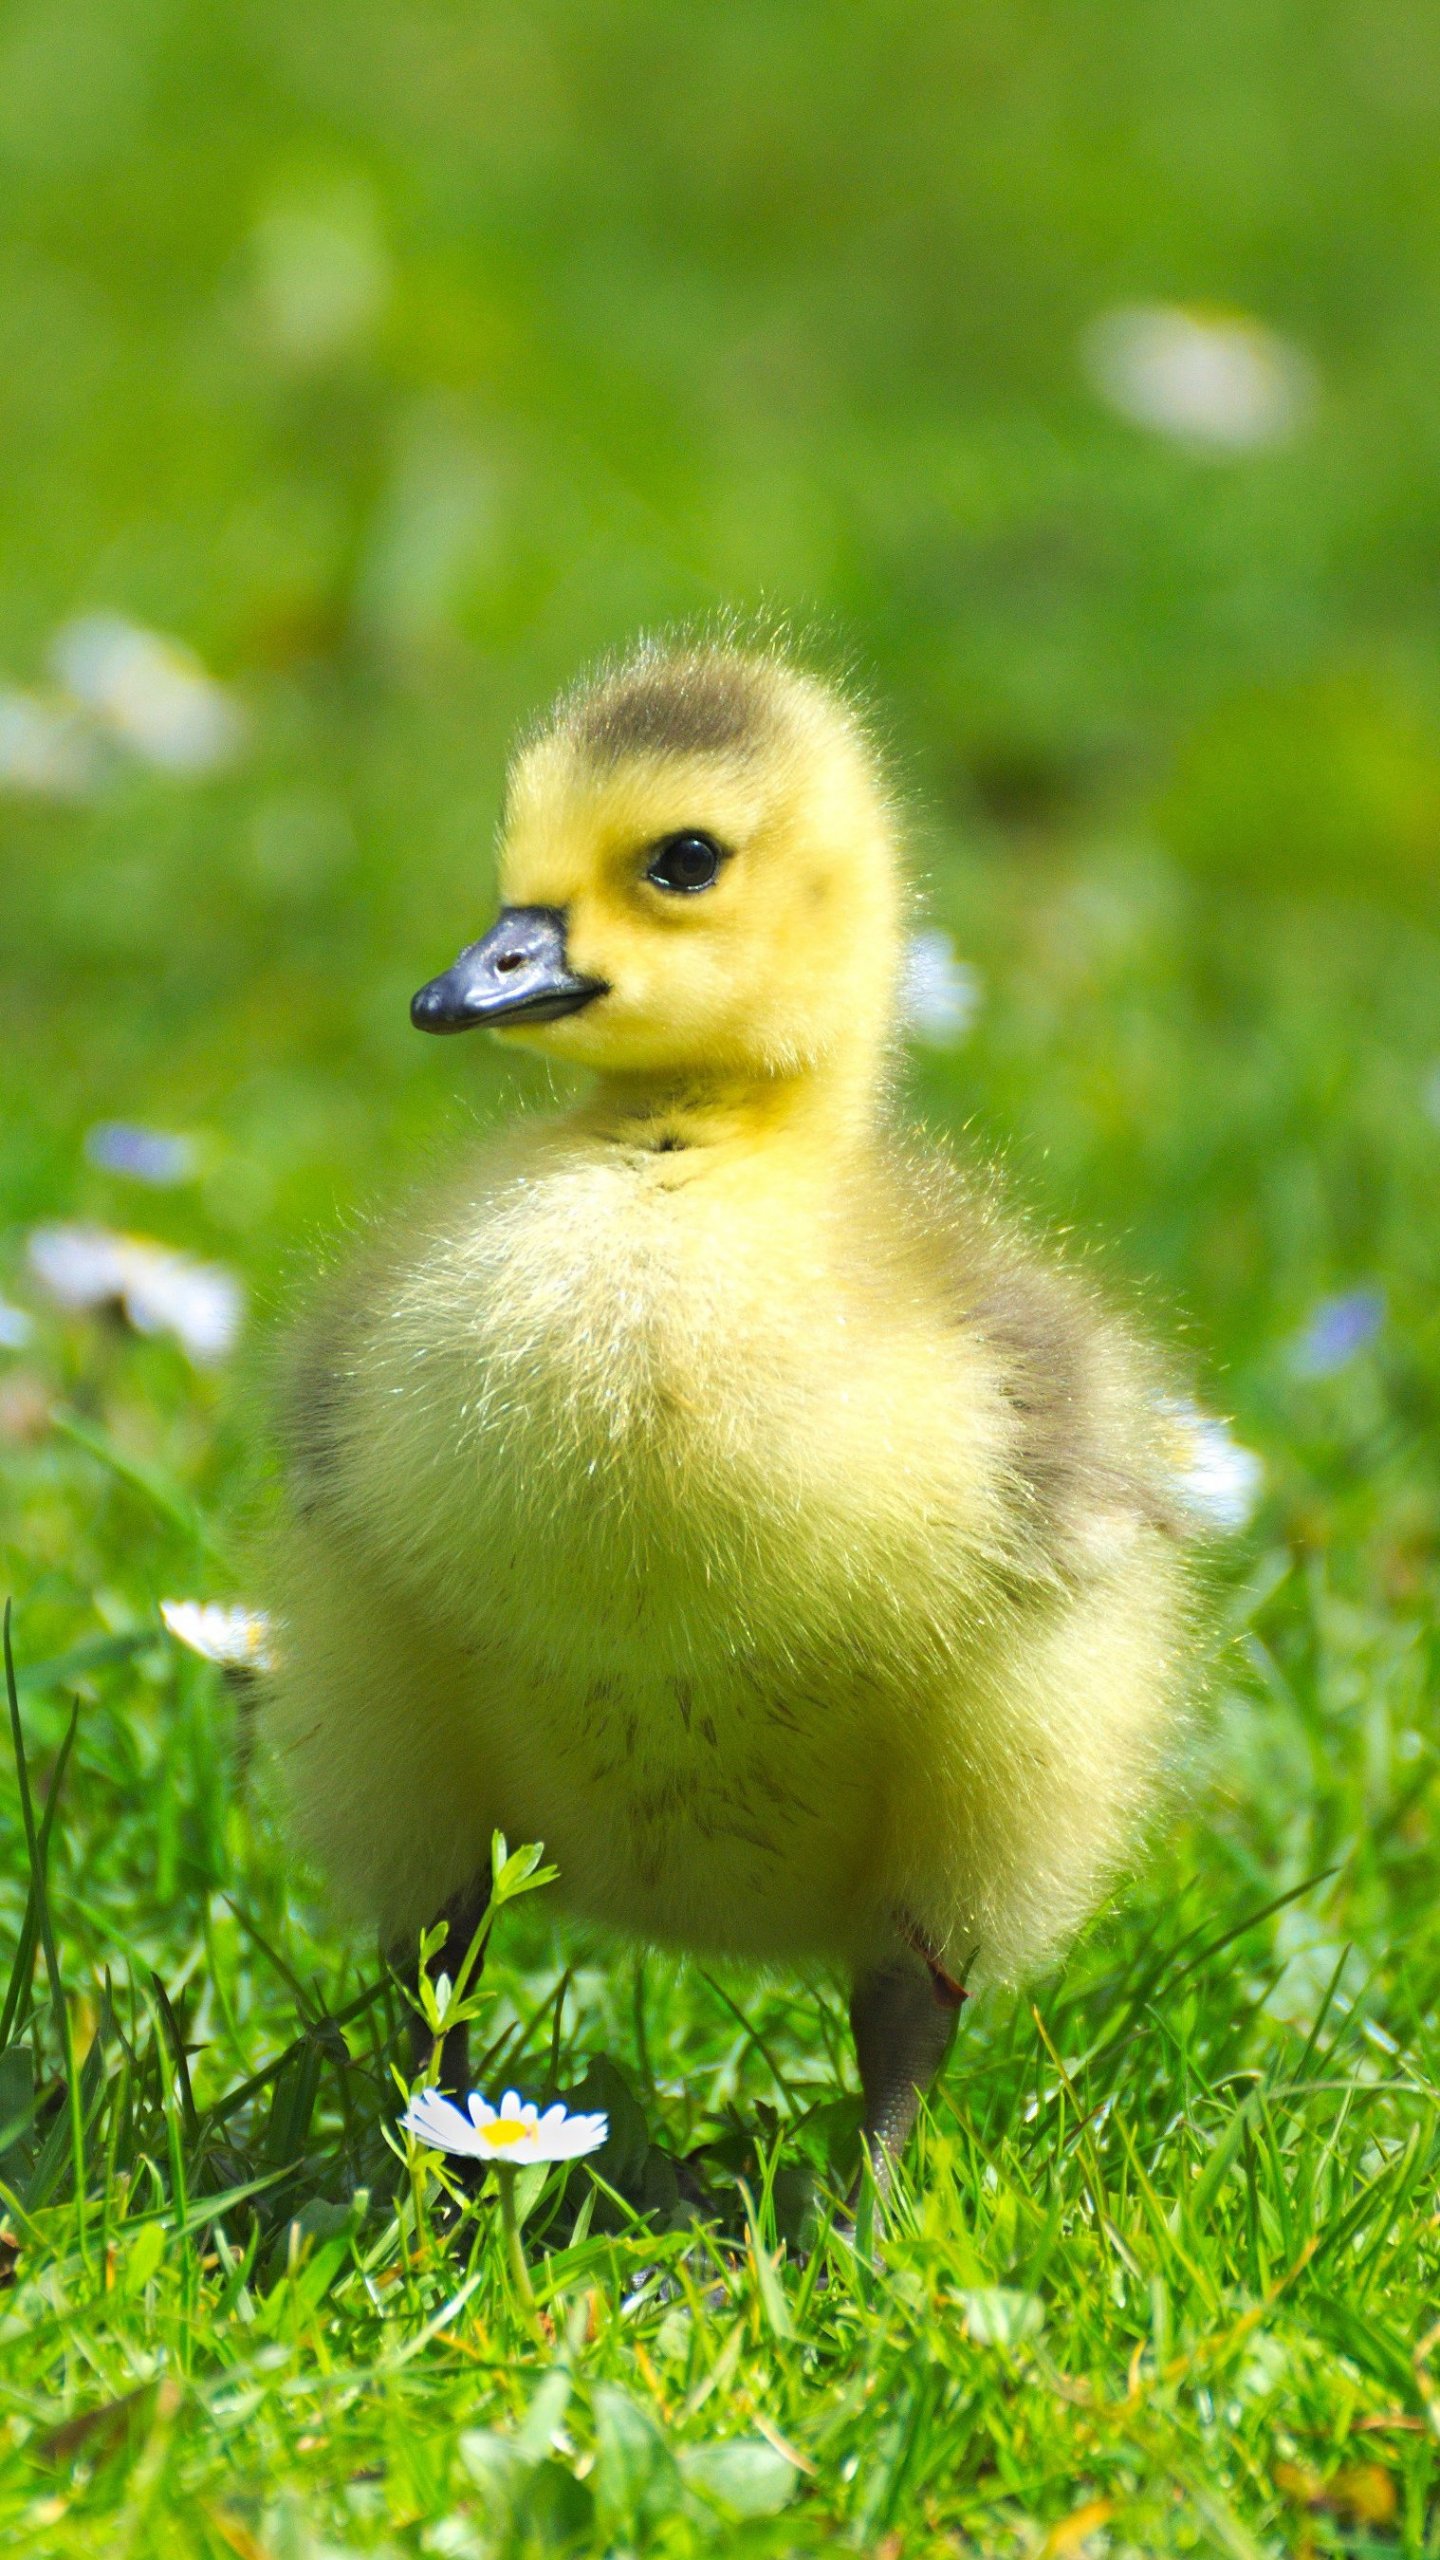 Fluffy Baby Goose Wallpaper - iPhone, Android & Desktop Backgrounds